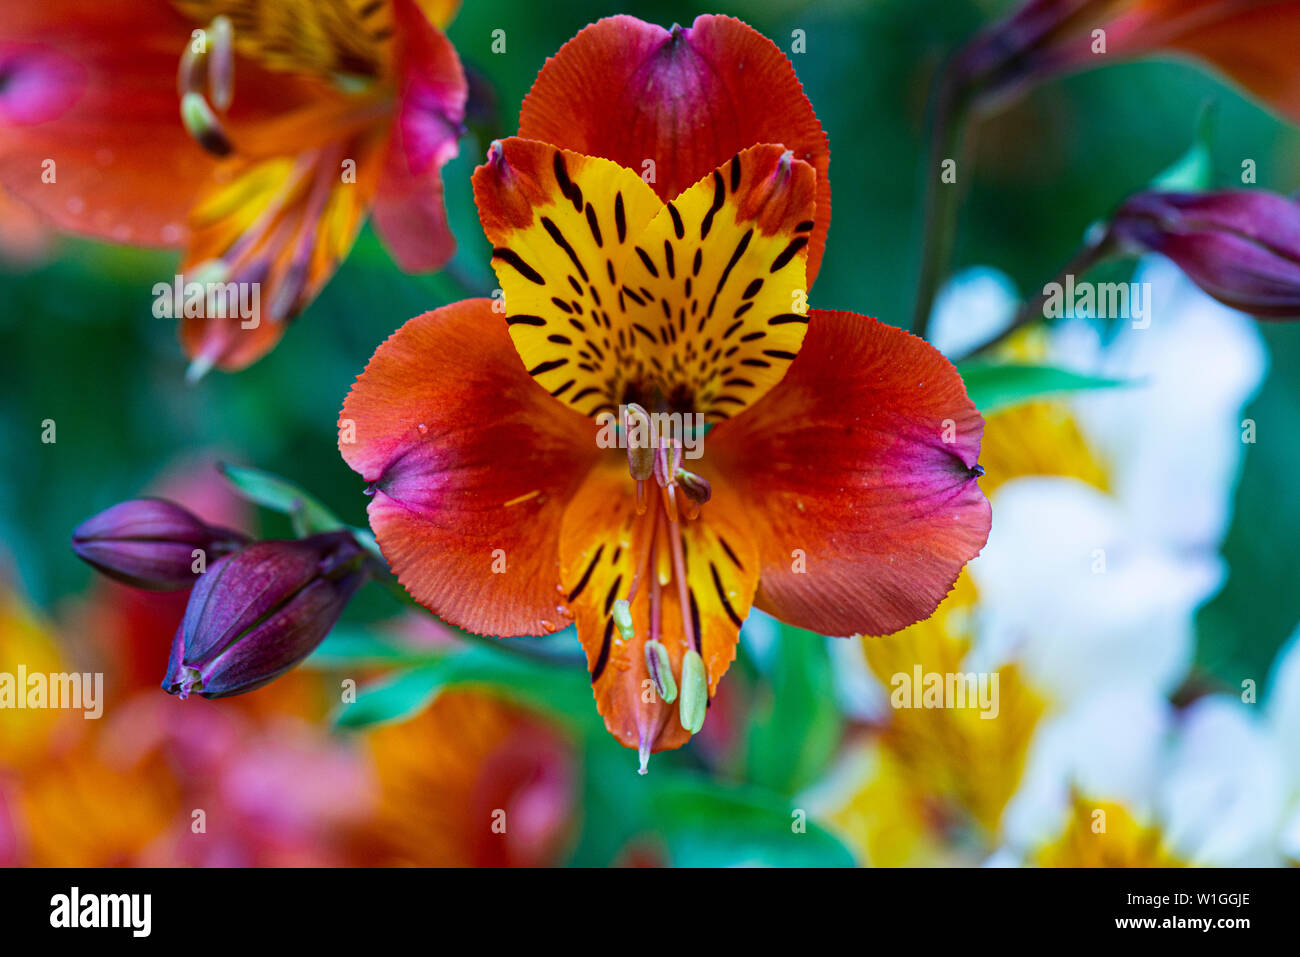 The flower of an Peruvian lily (Alstroemeria) Stock Photo